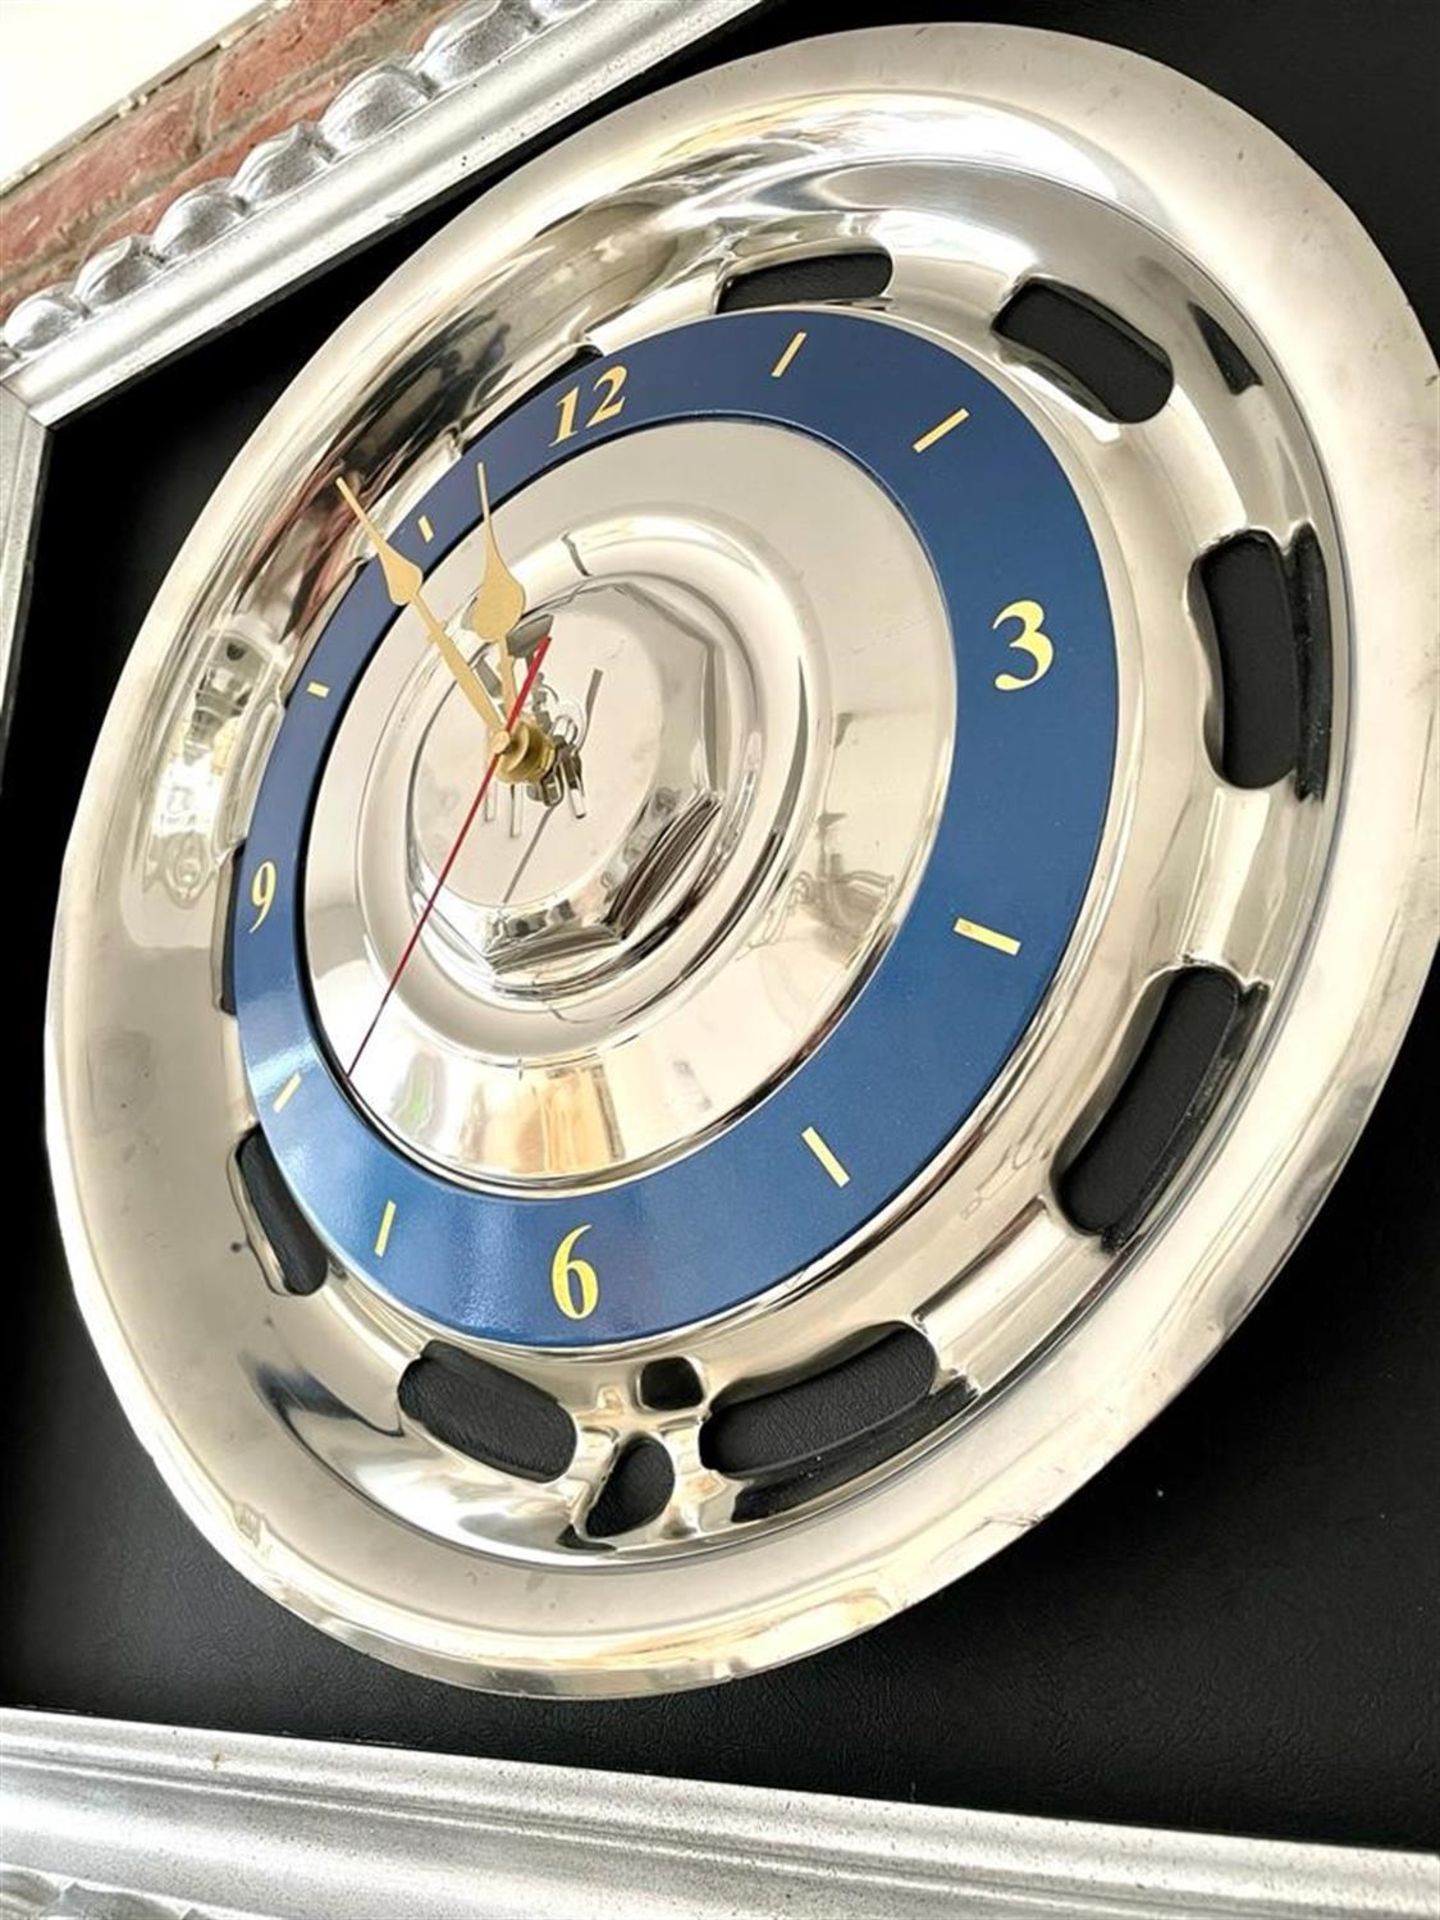 "Smooth Passage of Time" Rolls-Royce Hubcap Framed Wall Clock - Image 3 of 3